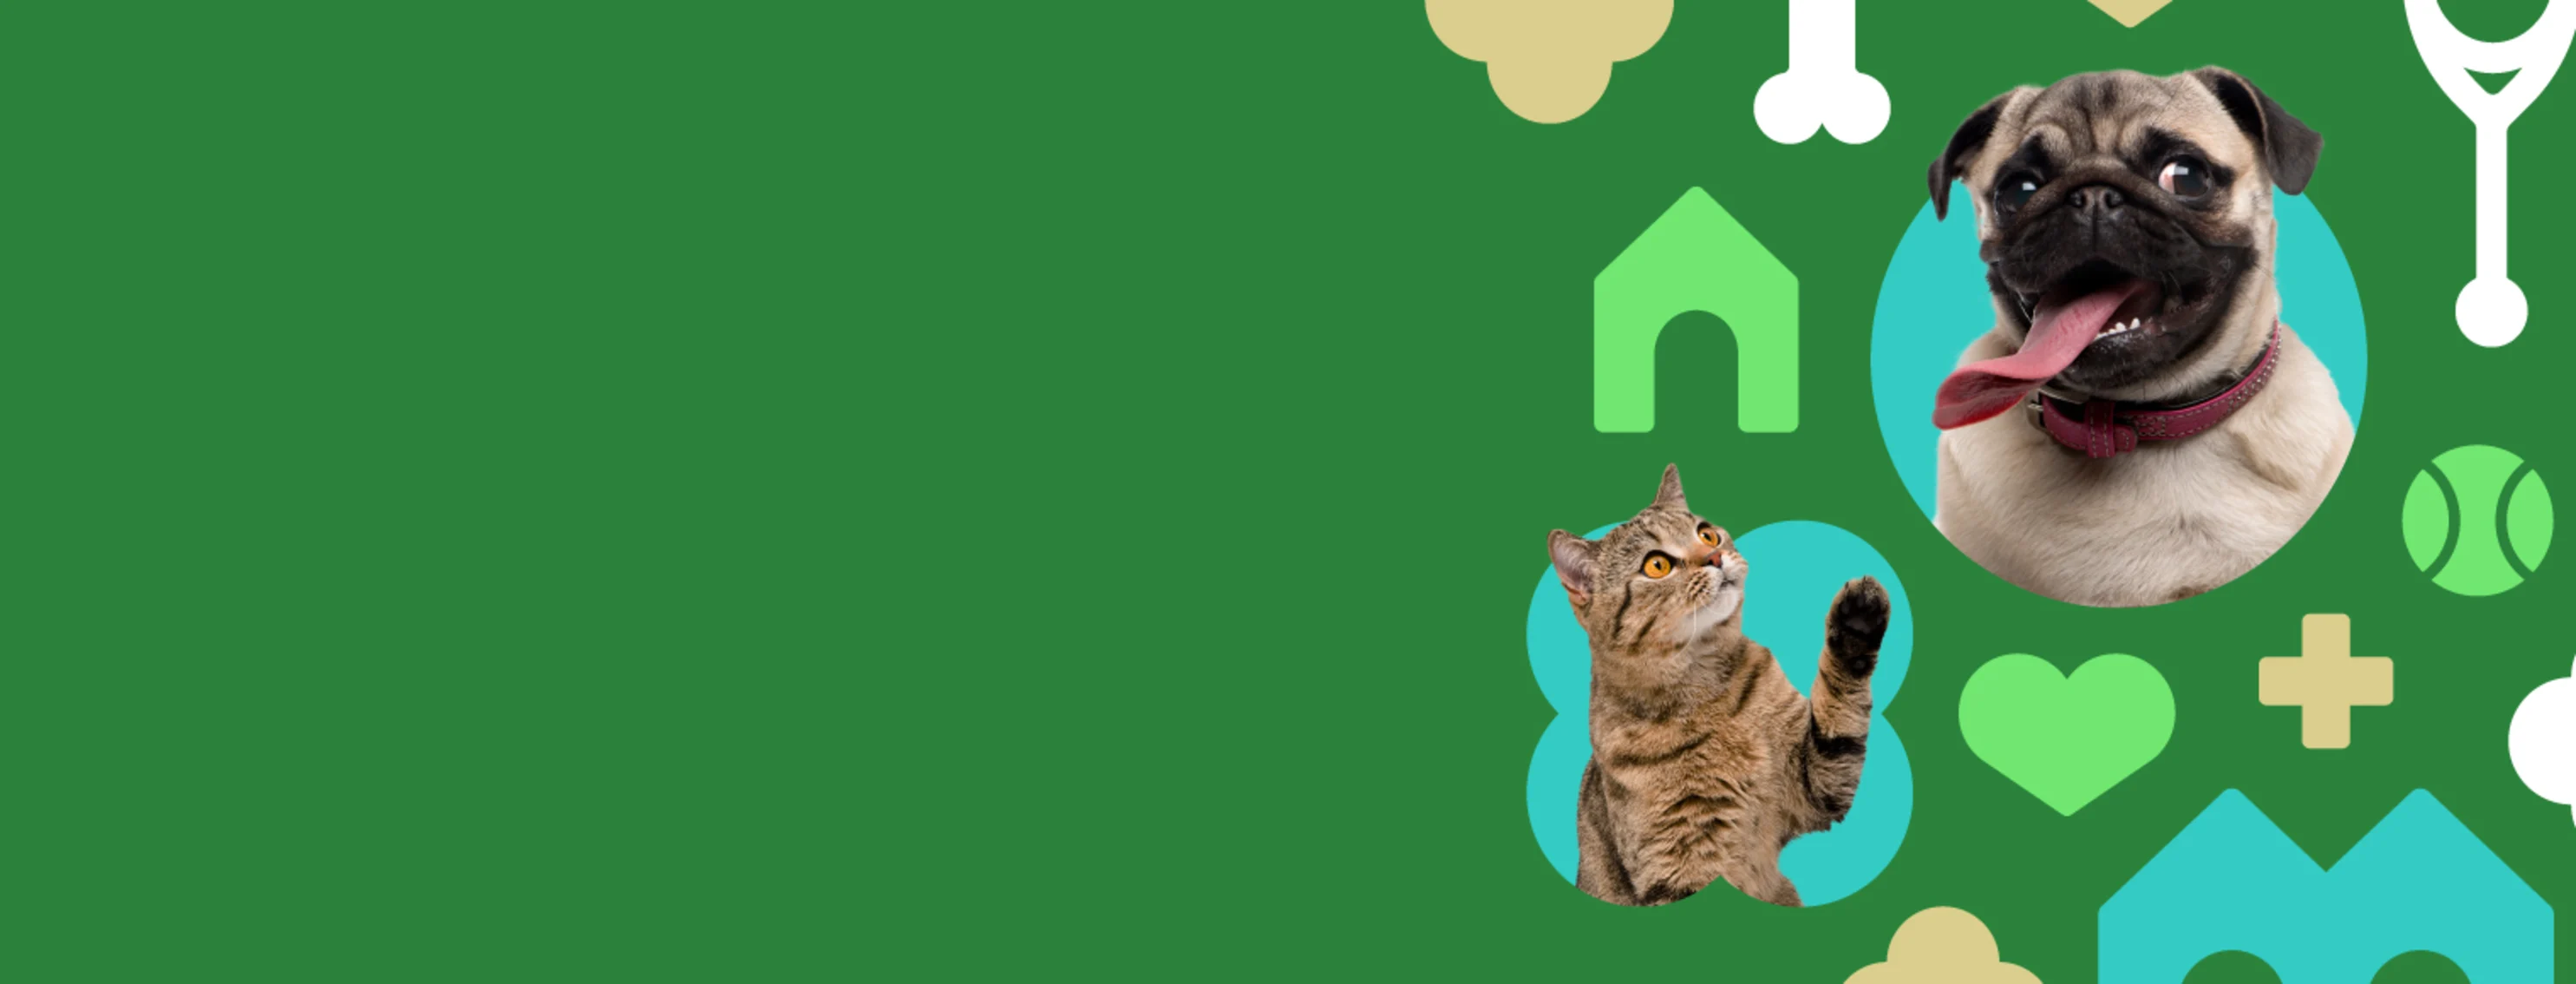 Happy dog and cat with green background and pet vet icons